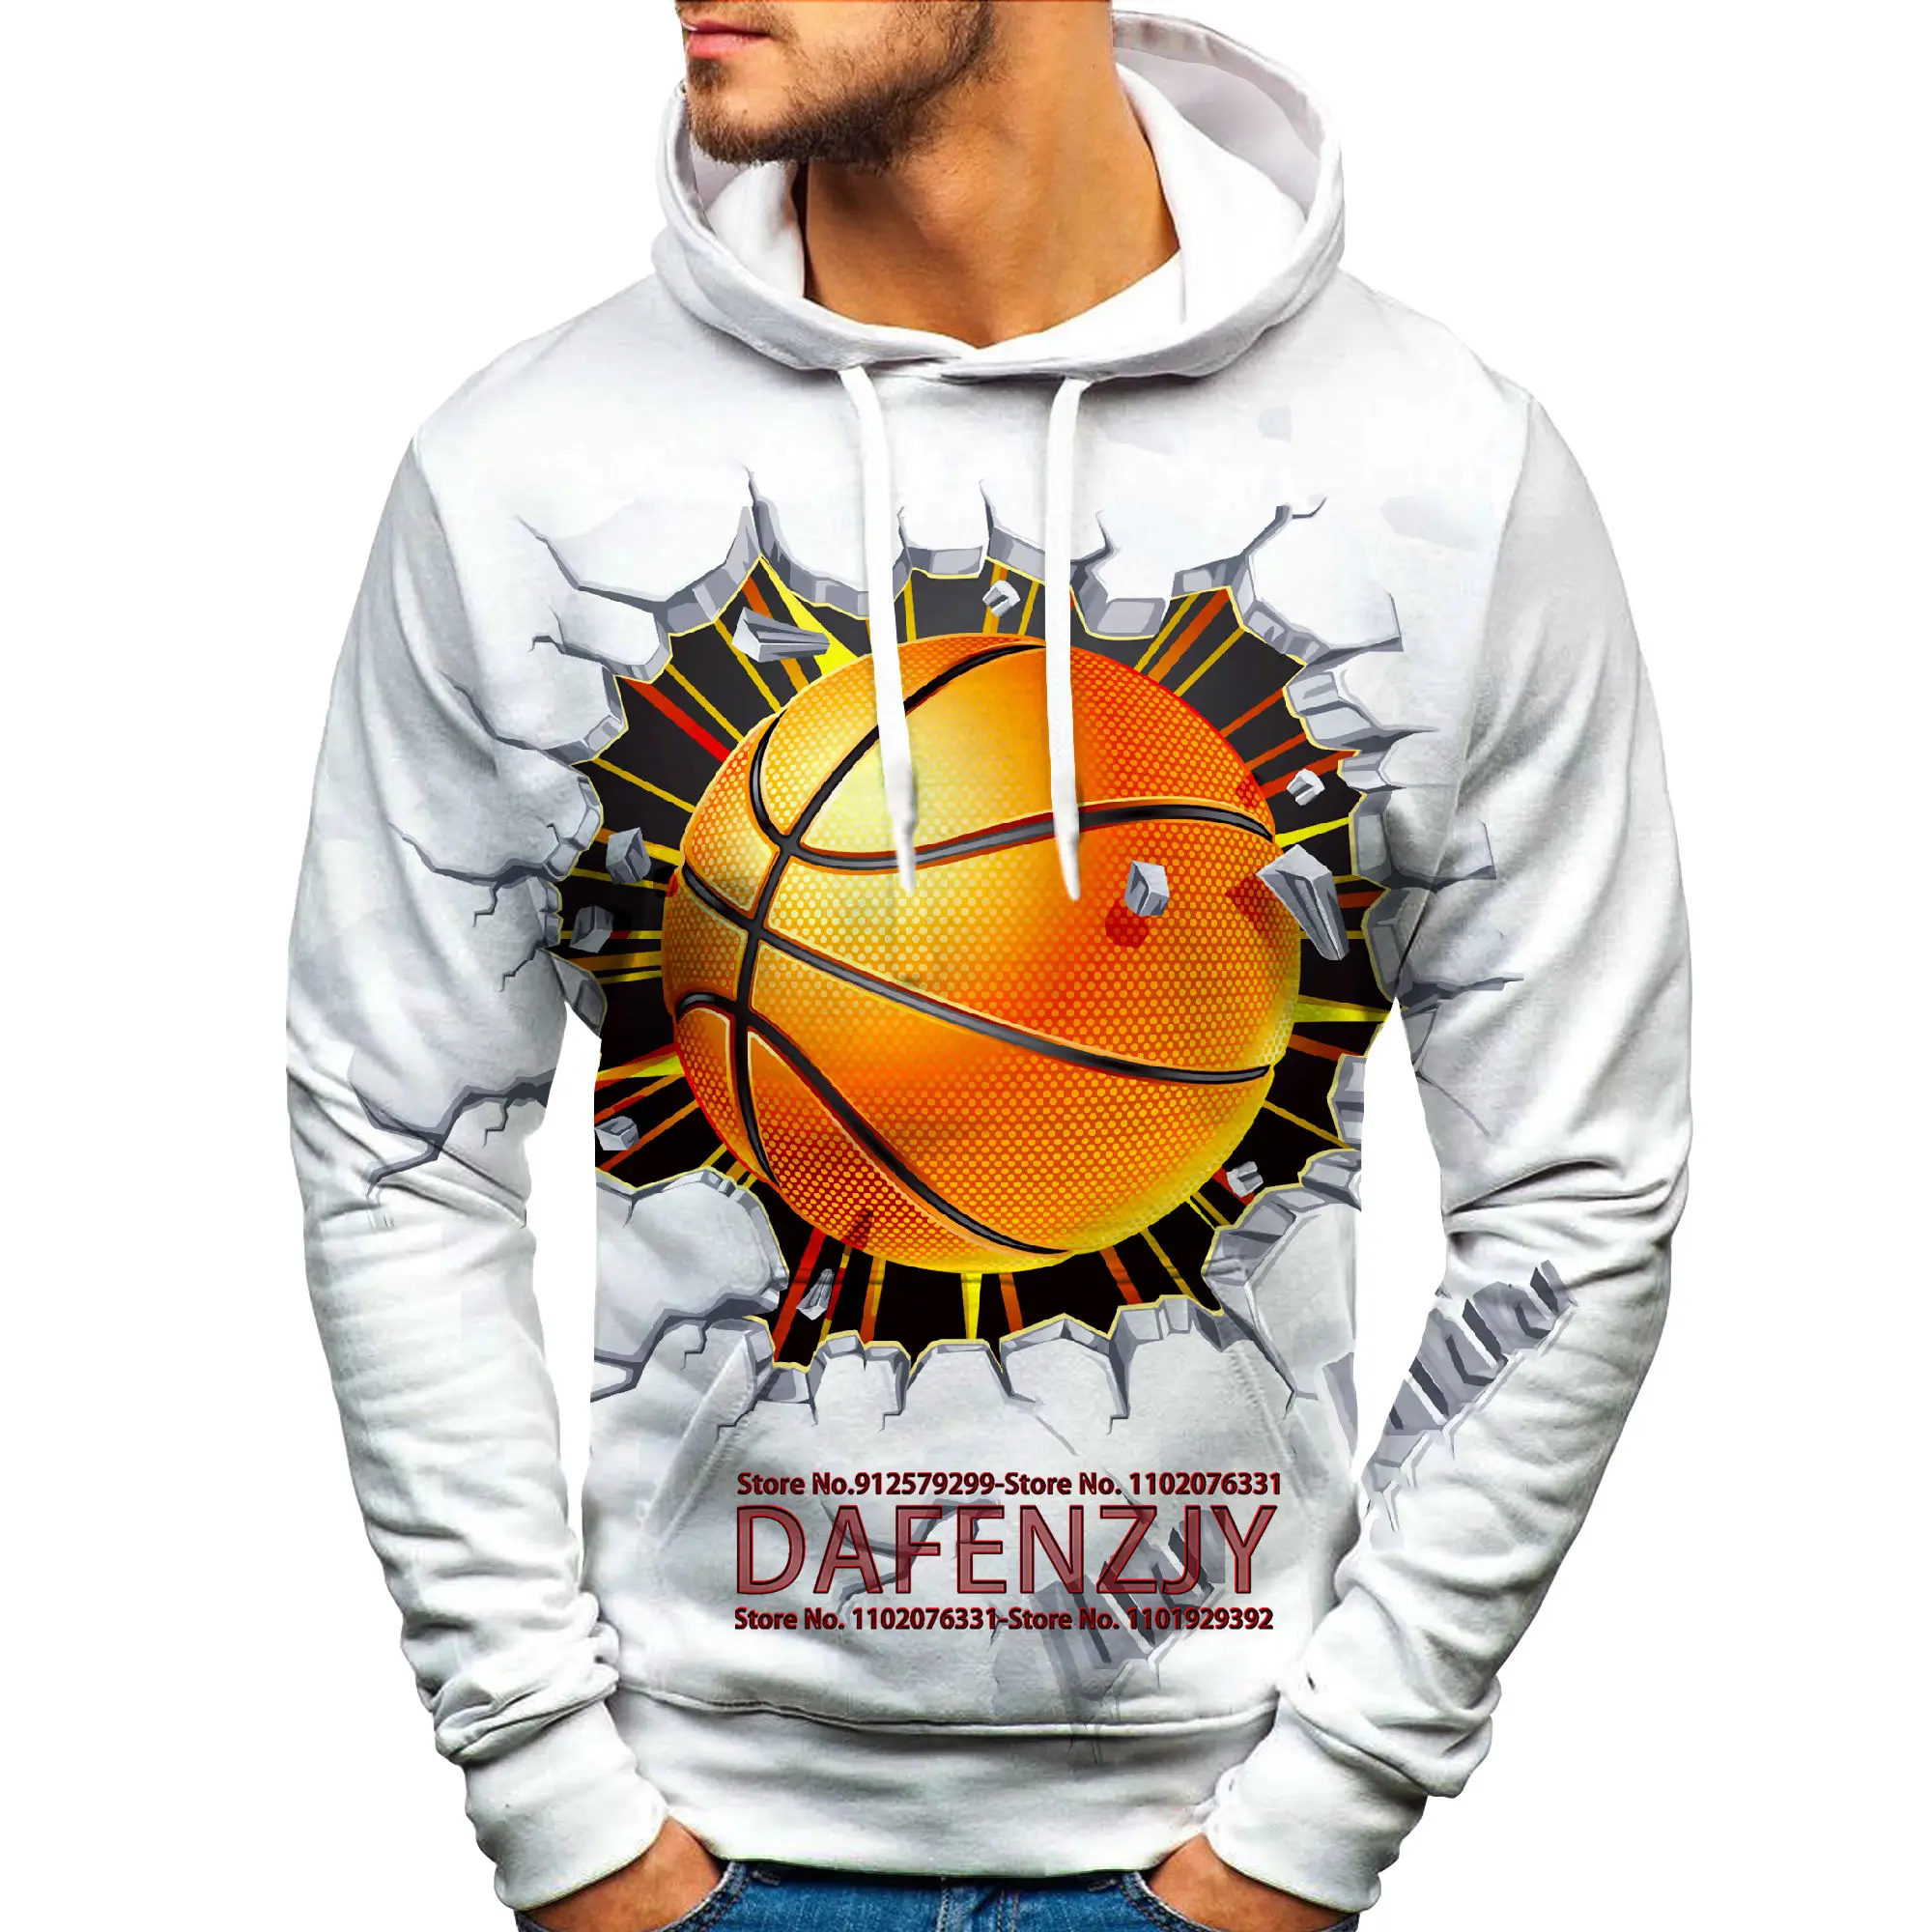 Funny Sports Basketball 3D Printed Hoodie Hip Hop Rock Mens Clothing Male Casual Sweatshirt Cool Pullover